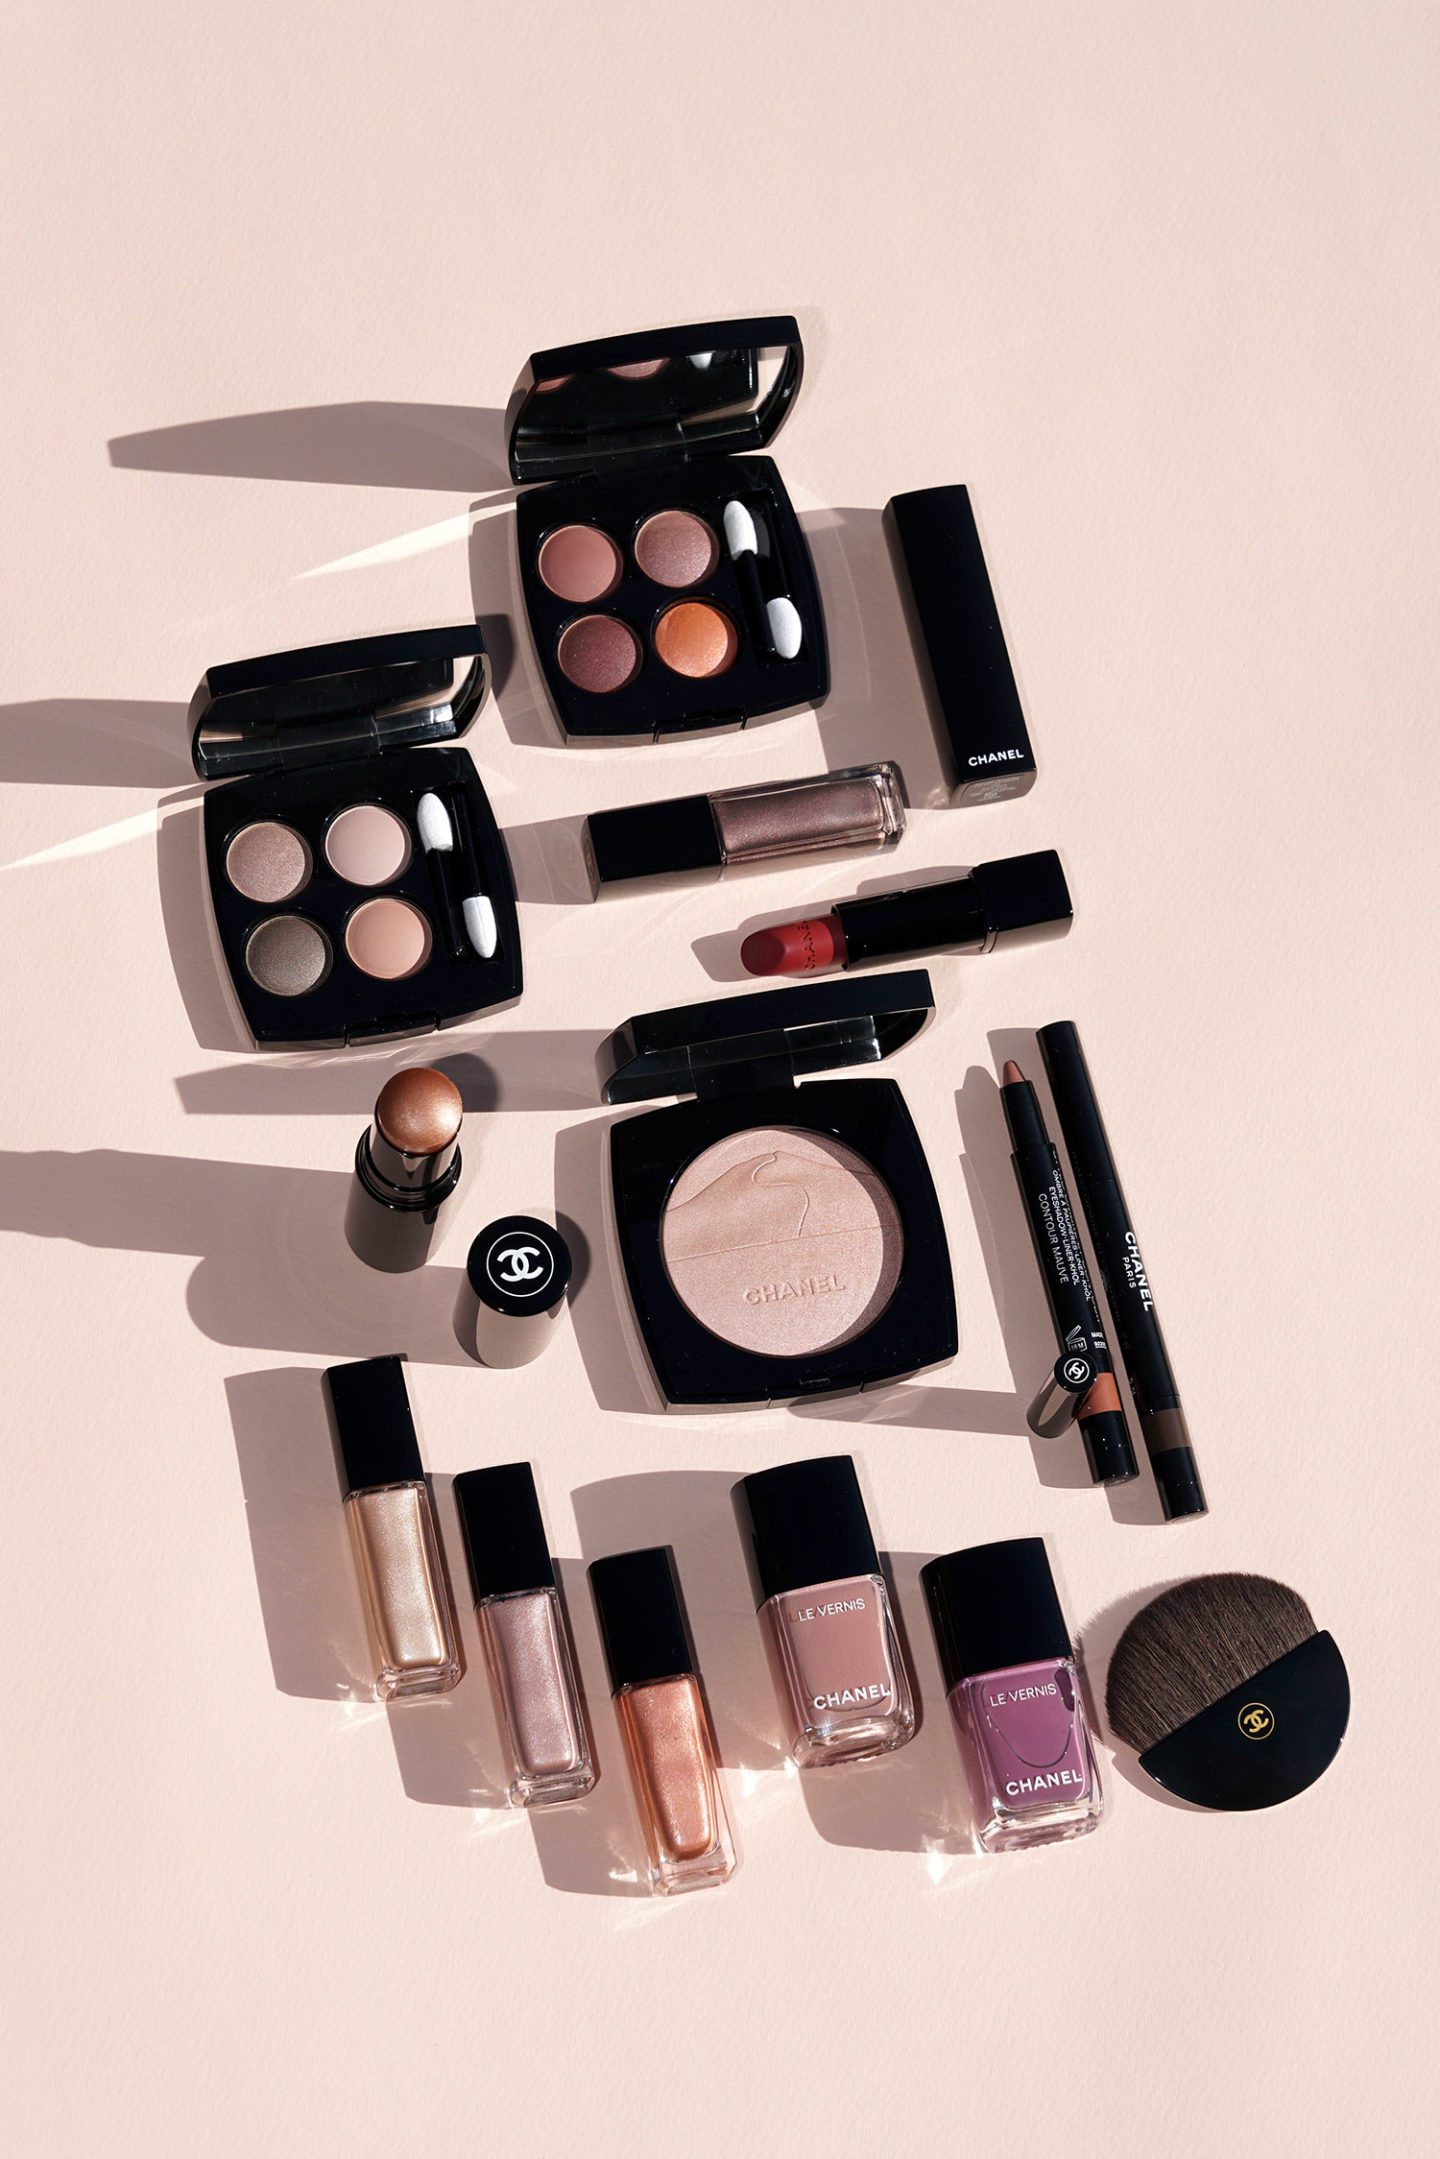 Chanel Spring Beauty 2020 Collection Review